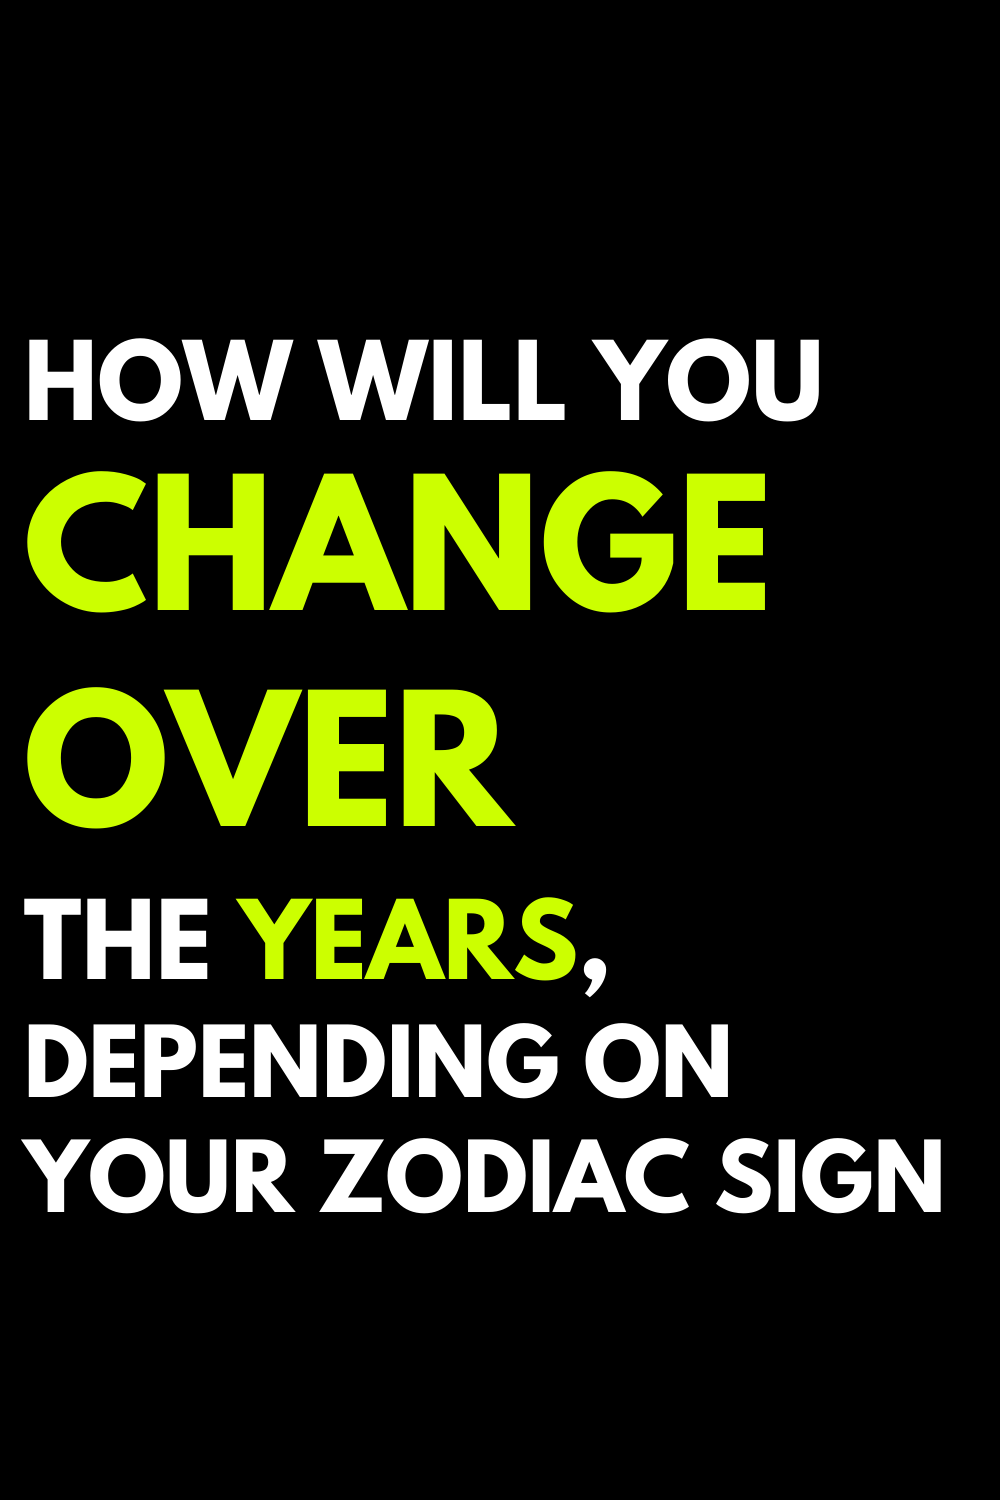 How will you change over the years, depending on your zodiac sign